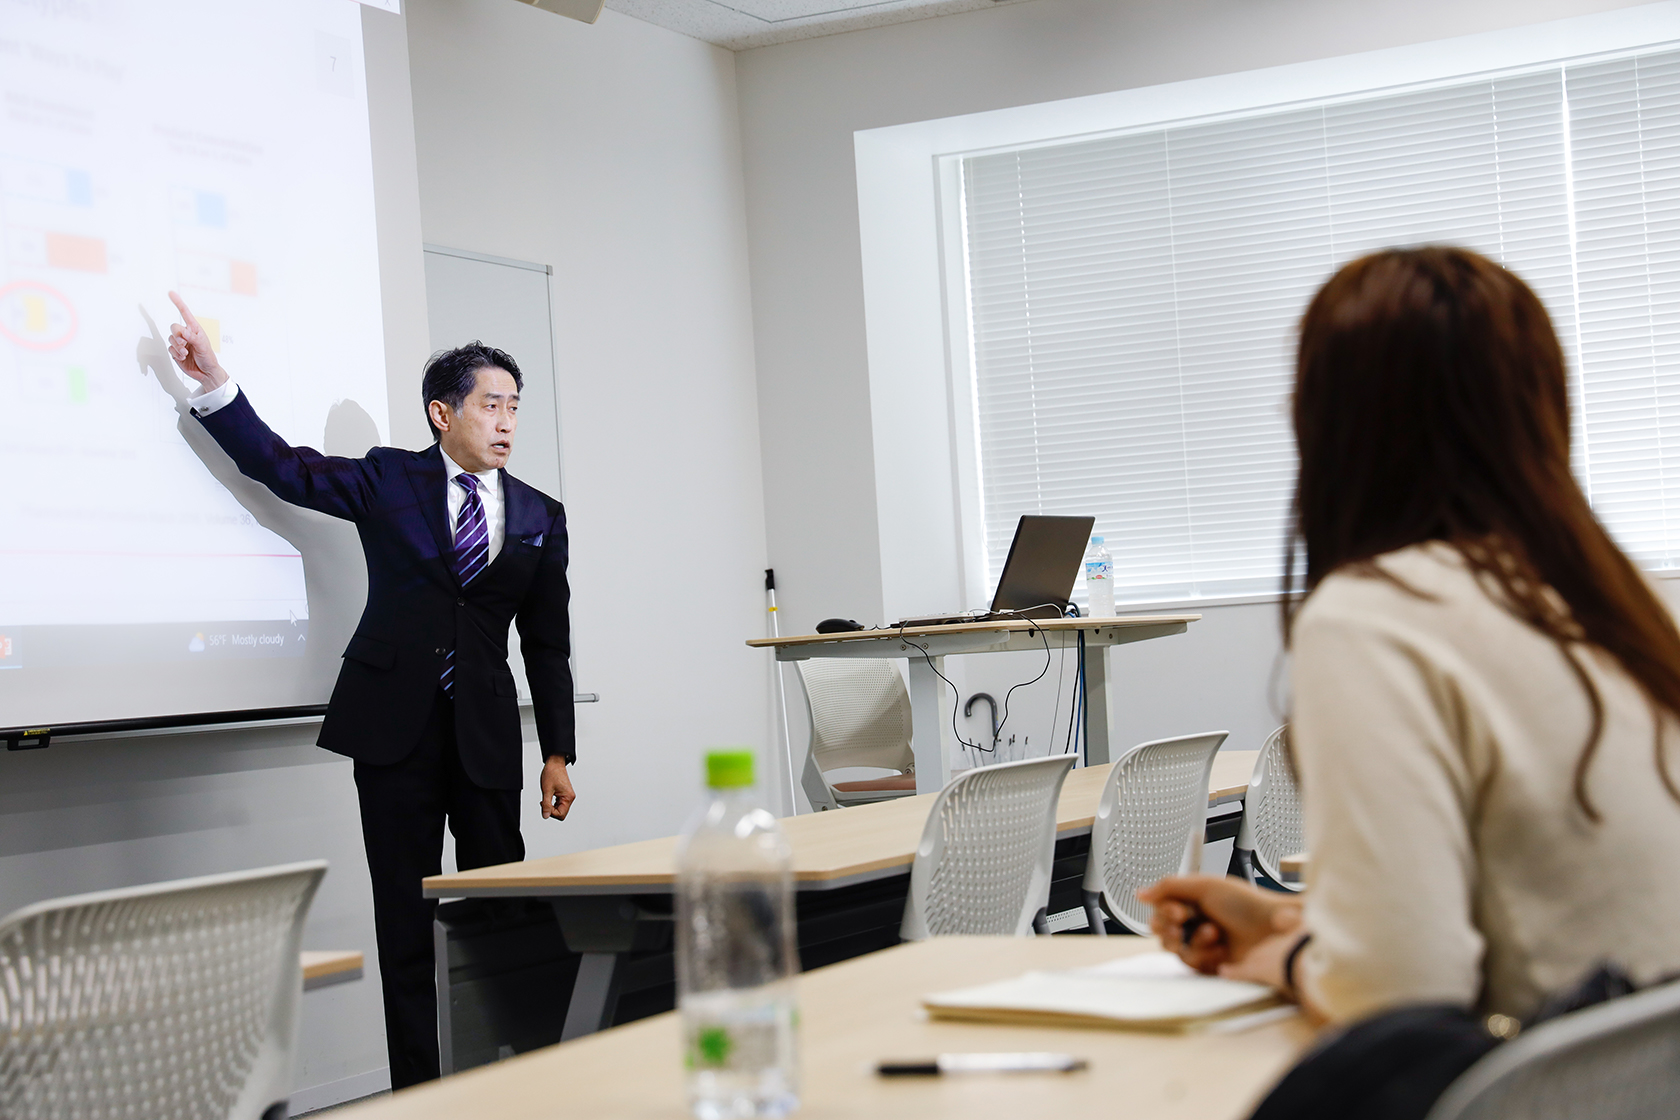 Astellas President Naoki Okamura delivers a lecture to students on TUJ campus